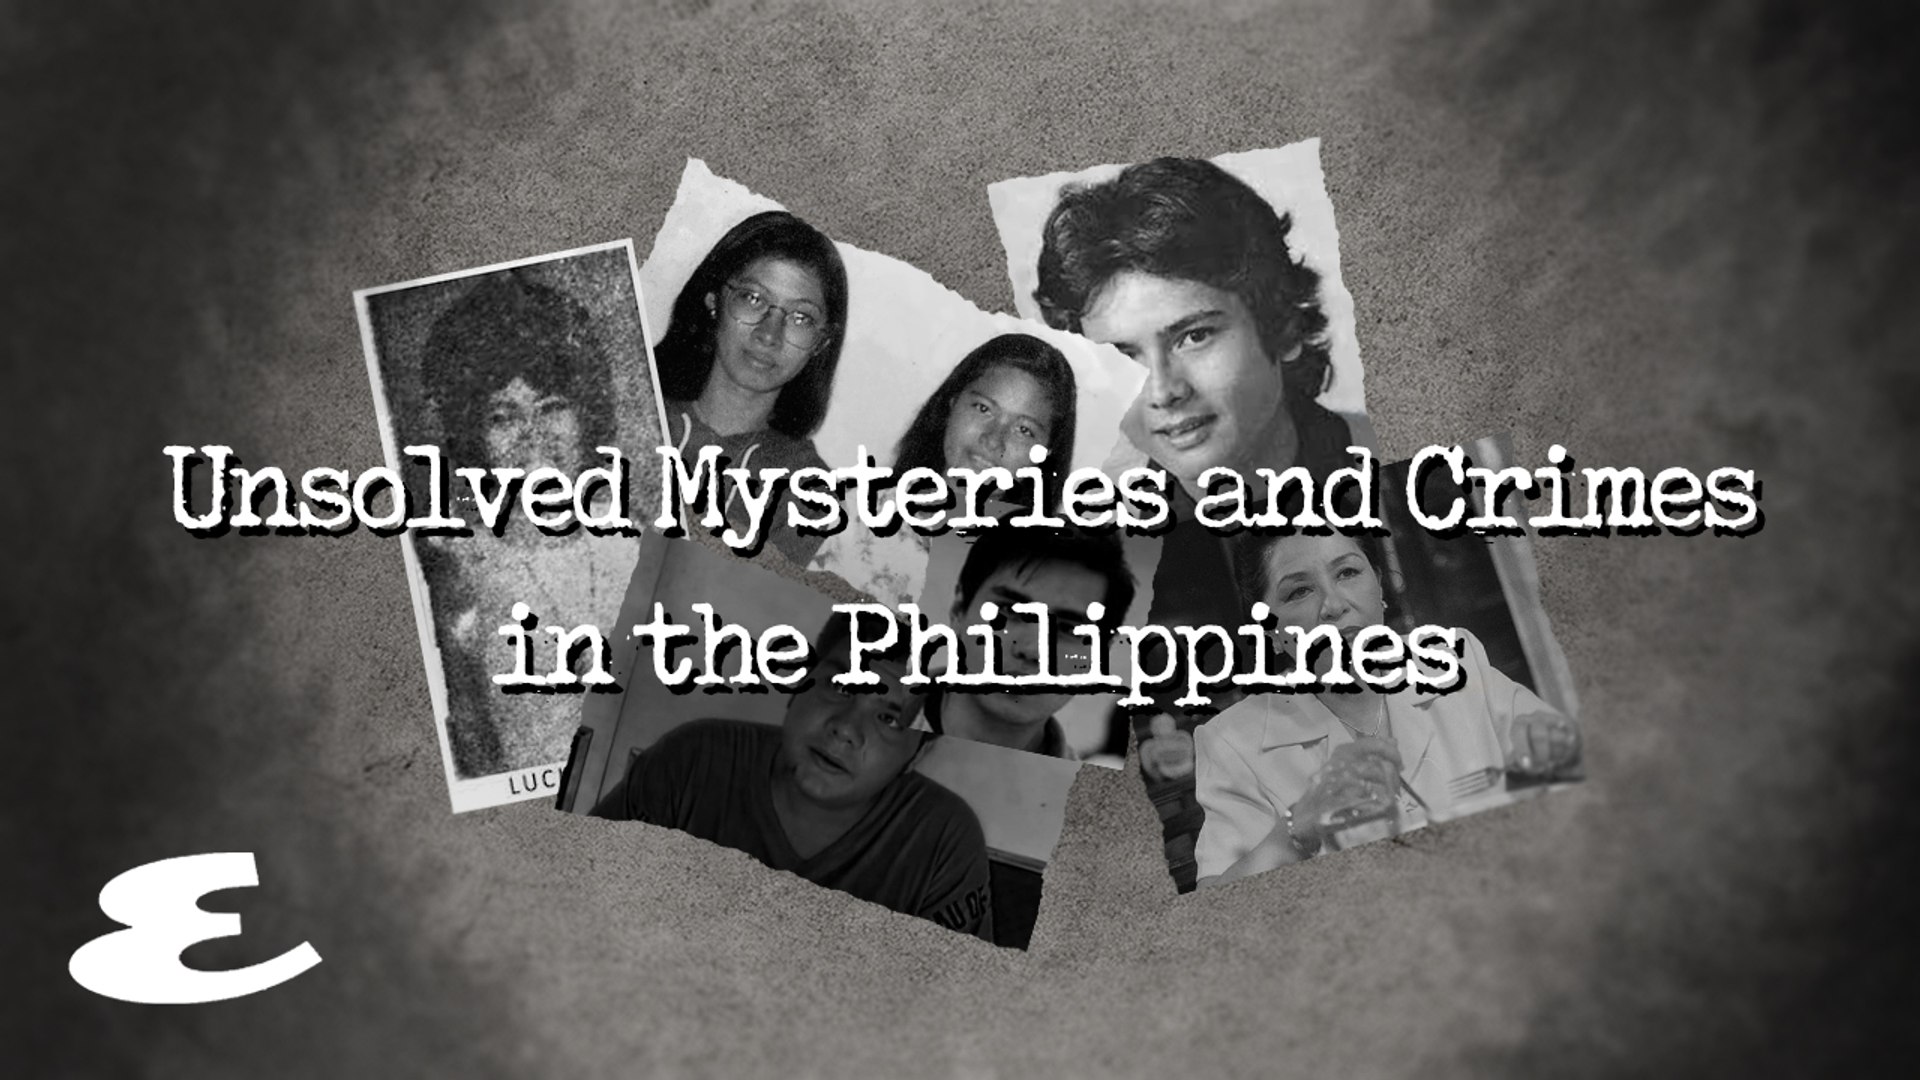 5 Shocking and High-Profile Unsolved Crimes in the Philippines